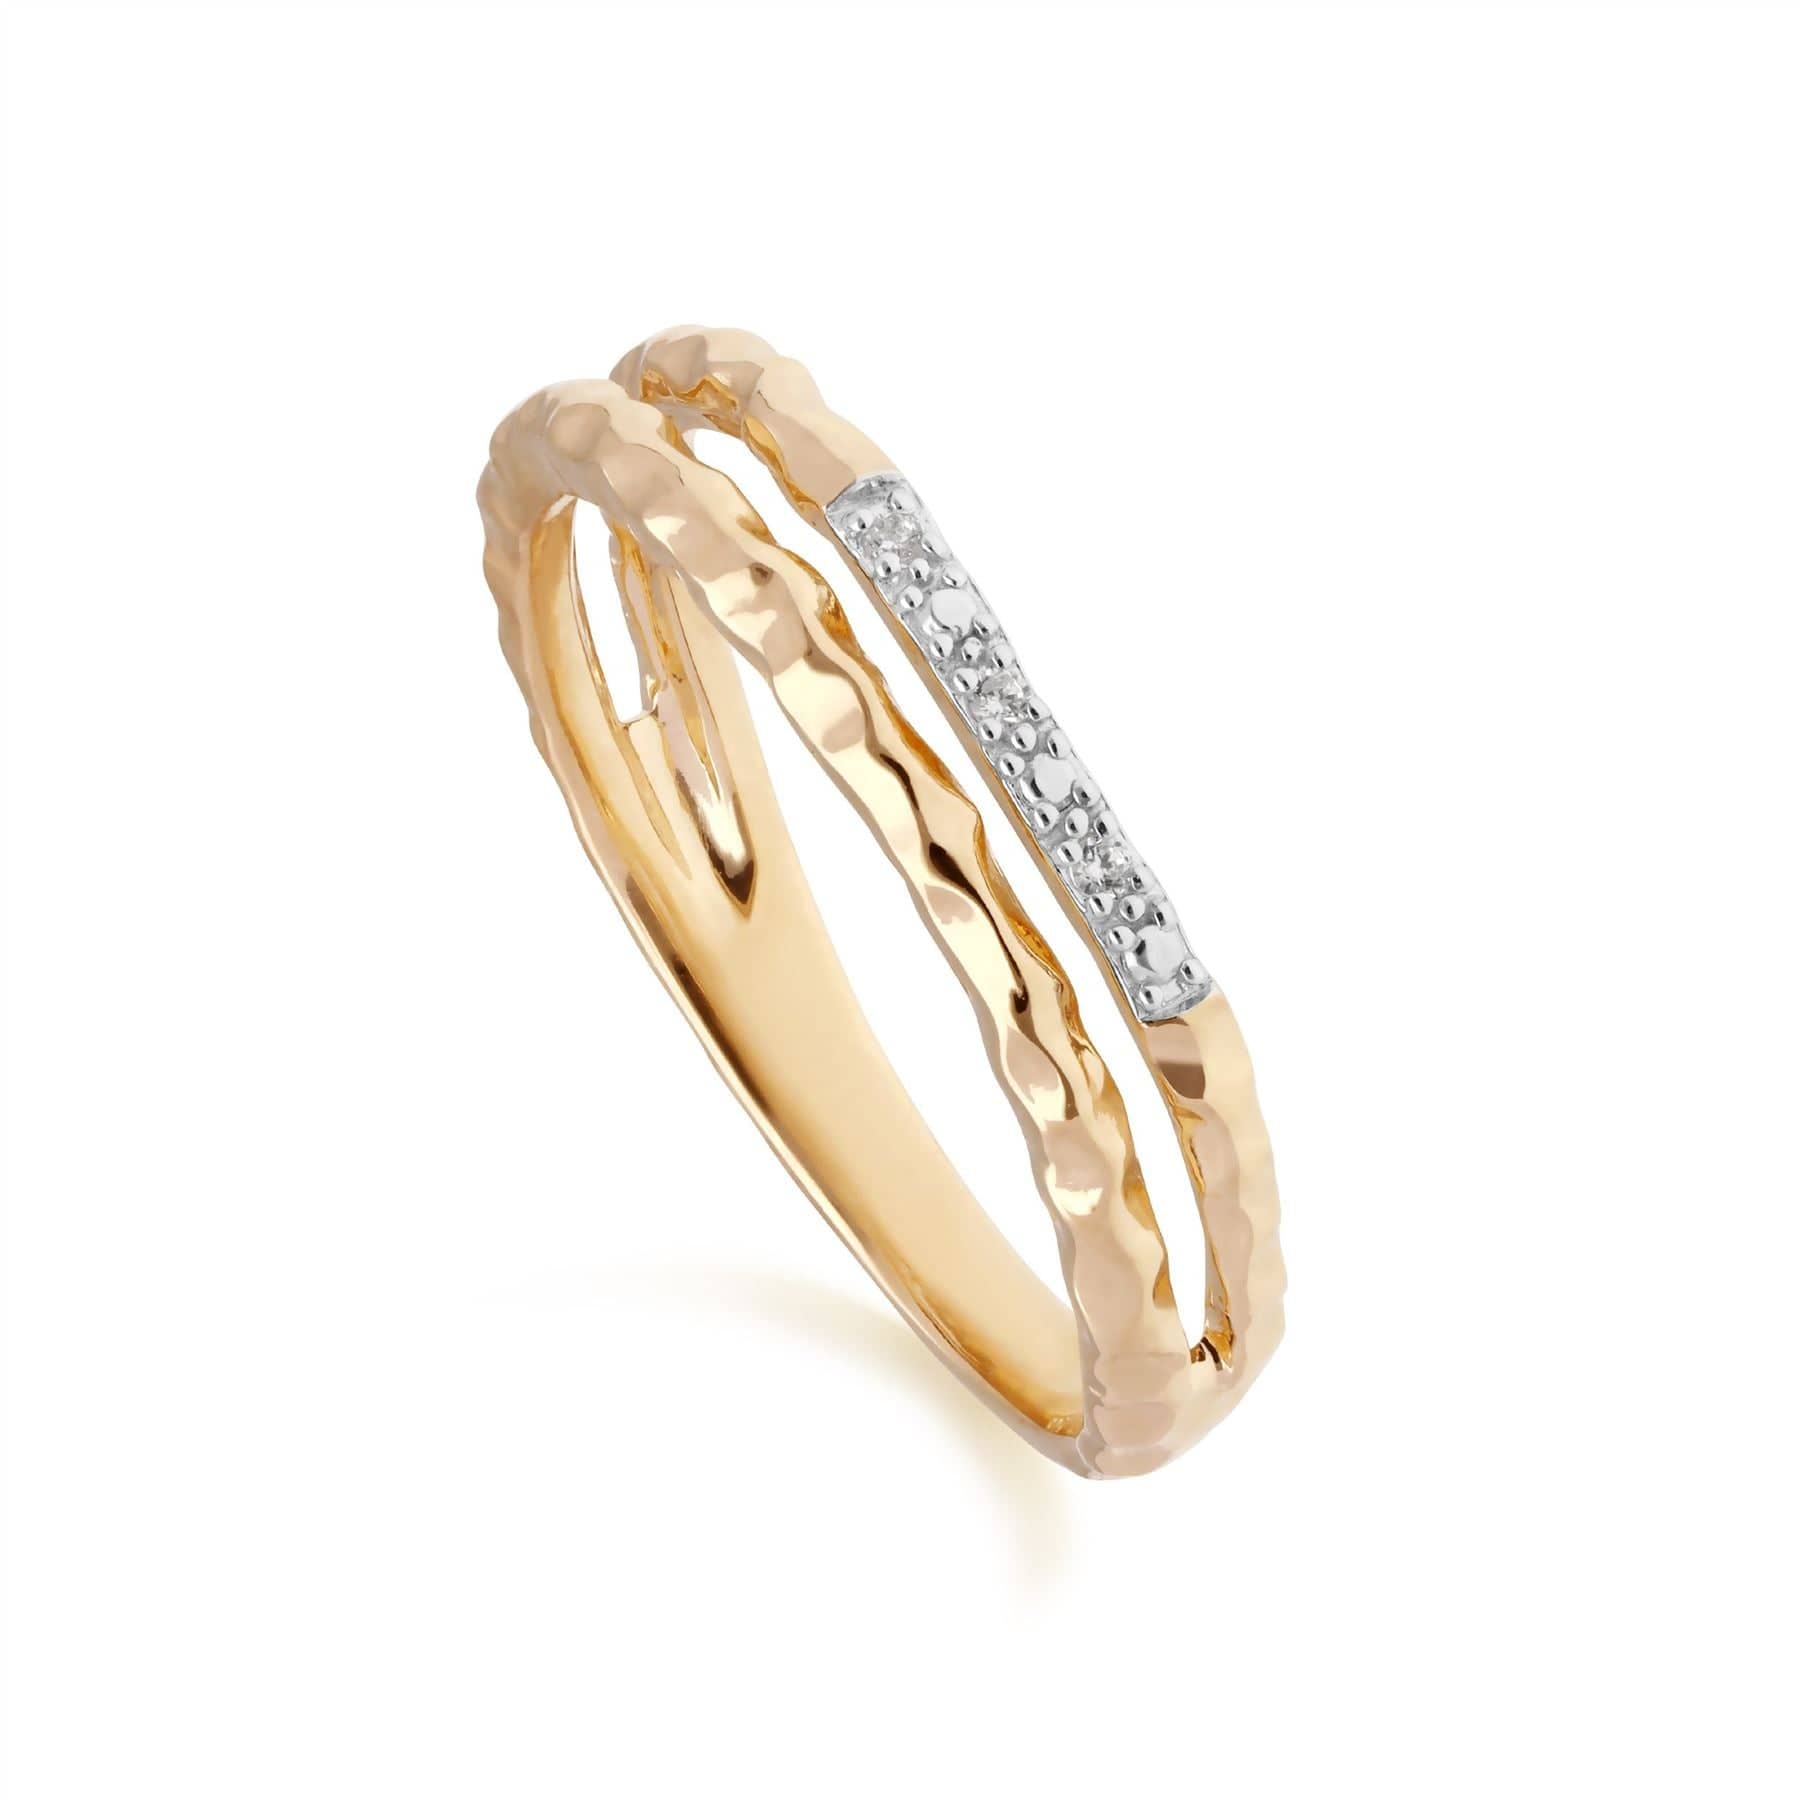 Gemondo Diamond Pavé Hammered Double Band Ring in Yellow Gold